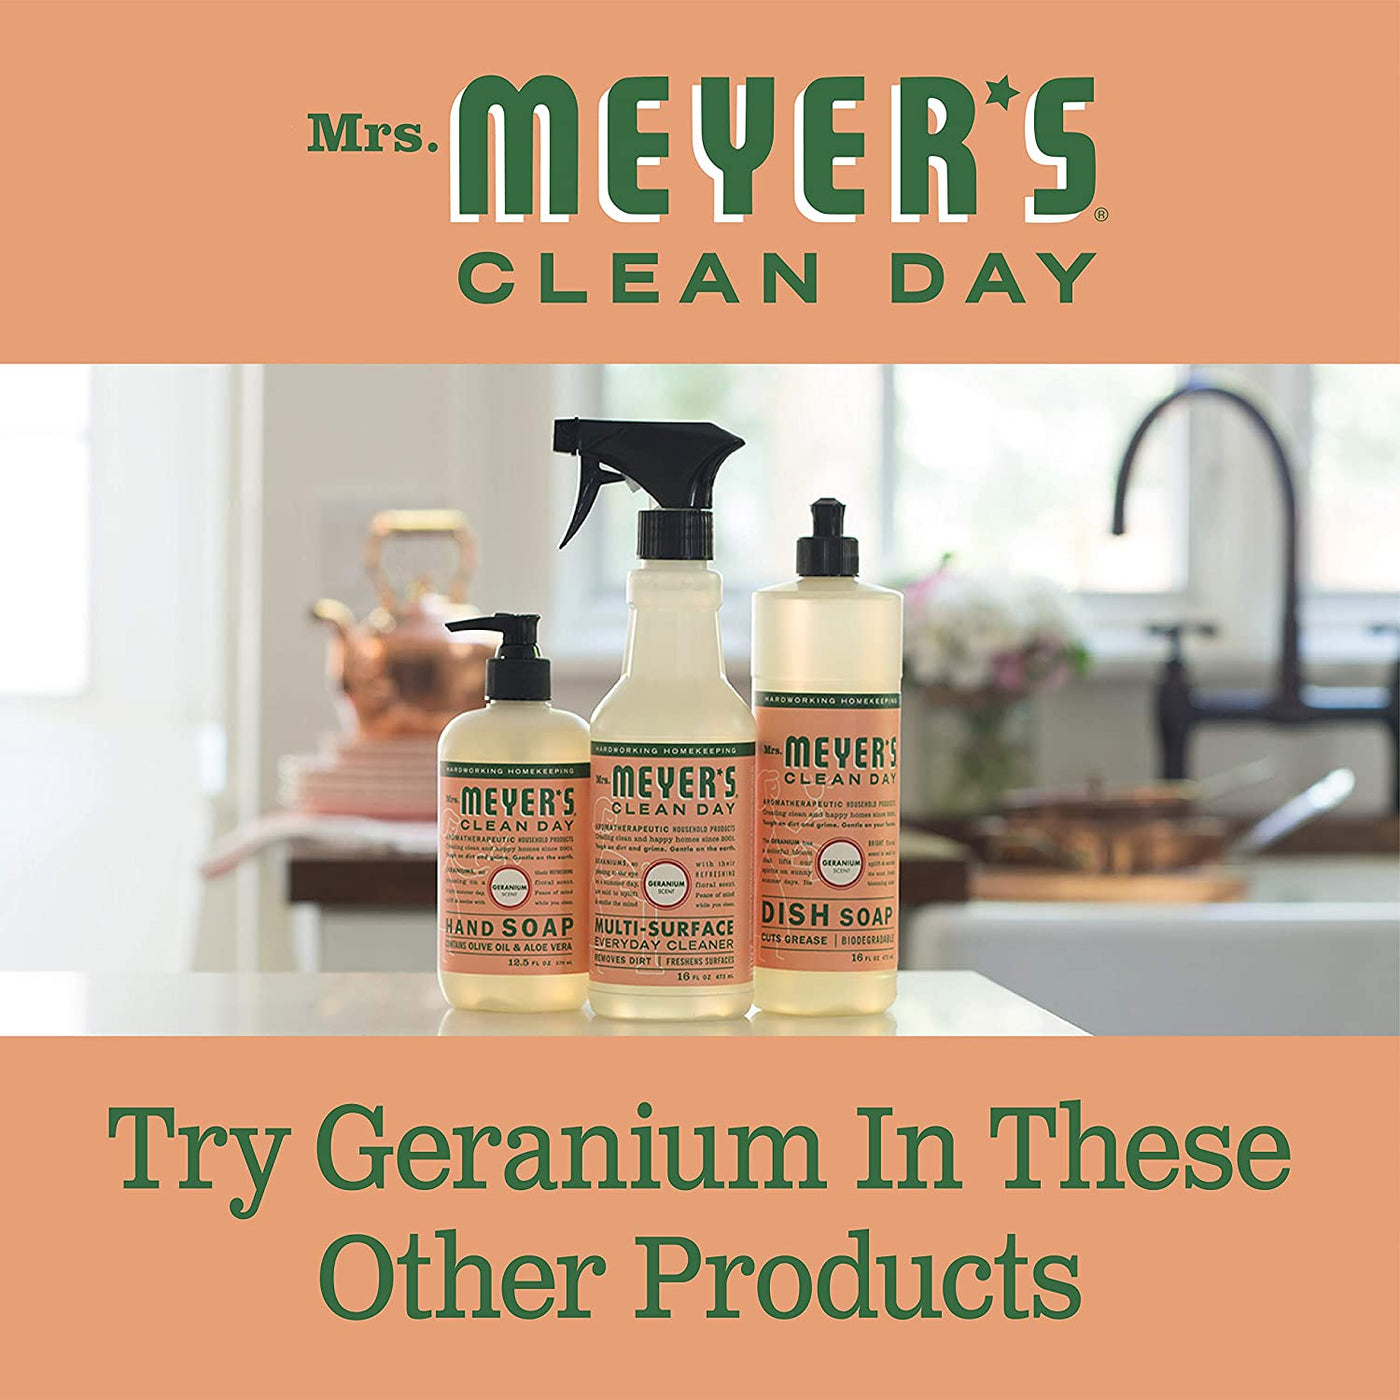 Mrs. Meyer's Kitchen Essentials Set, Includes: Hand Soap, Dish Soap, and All Purpose Cleaner, Geranium, 3 Count Pack